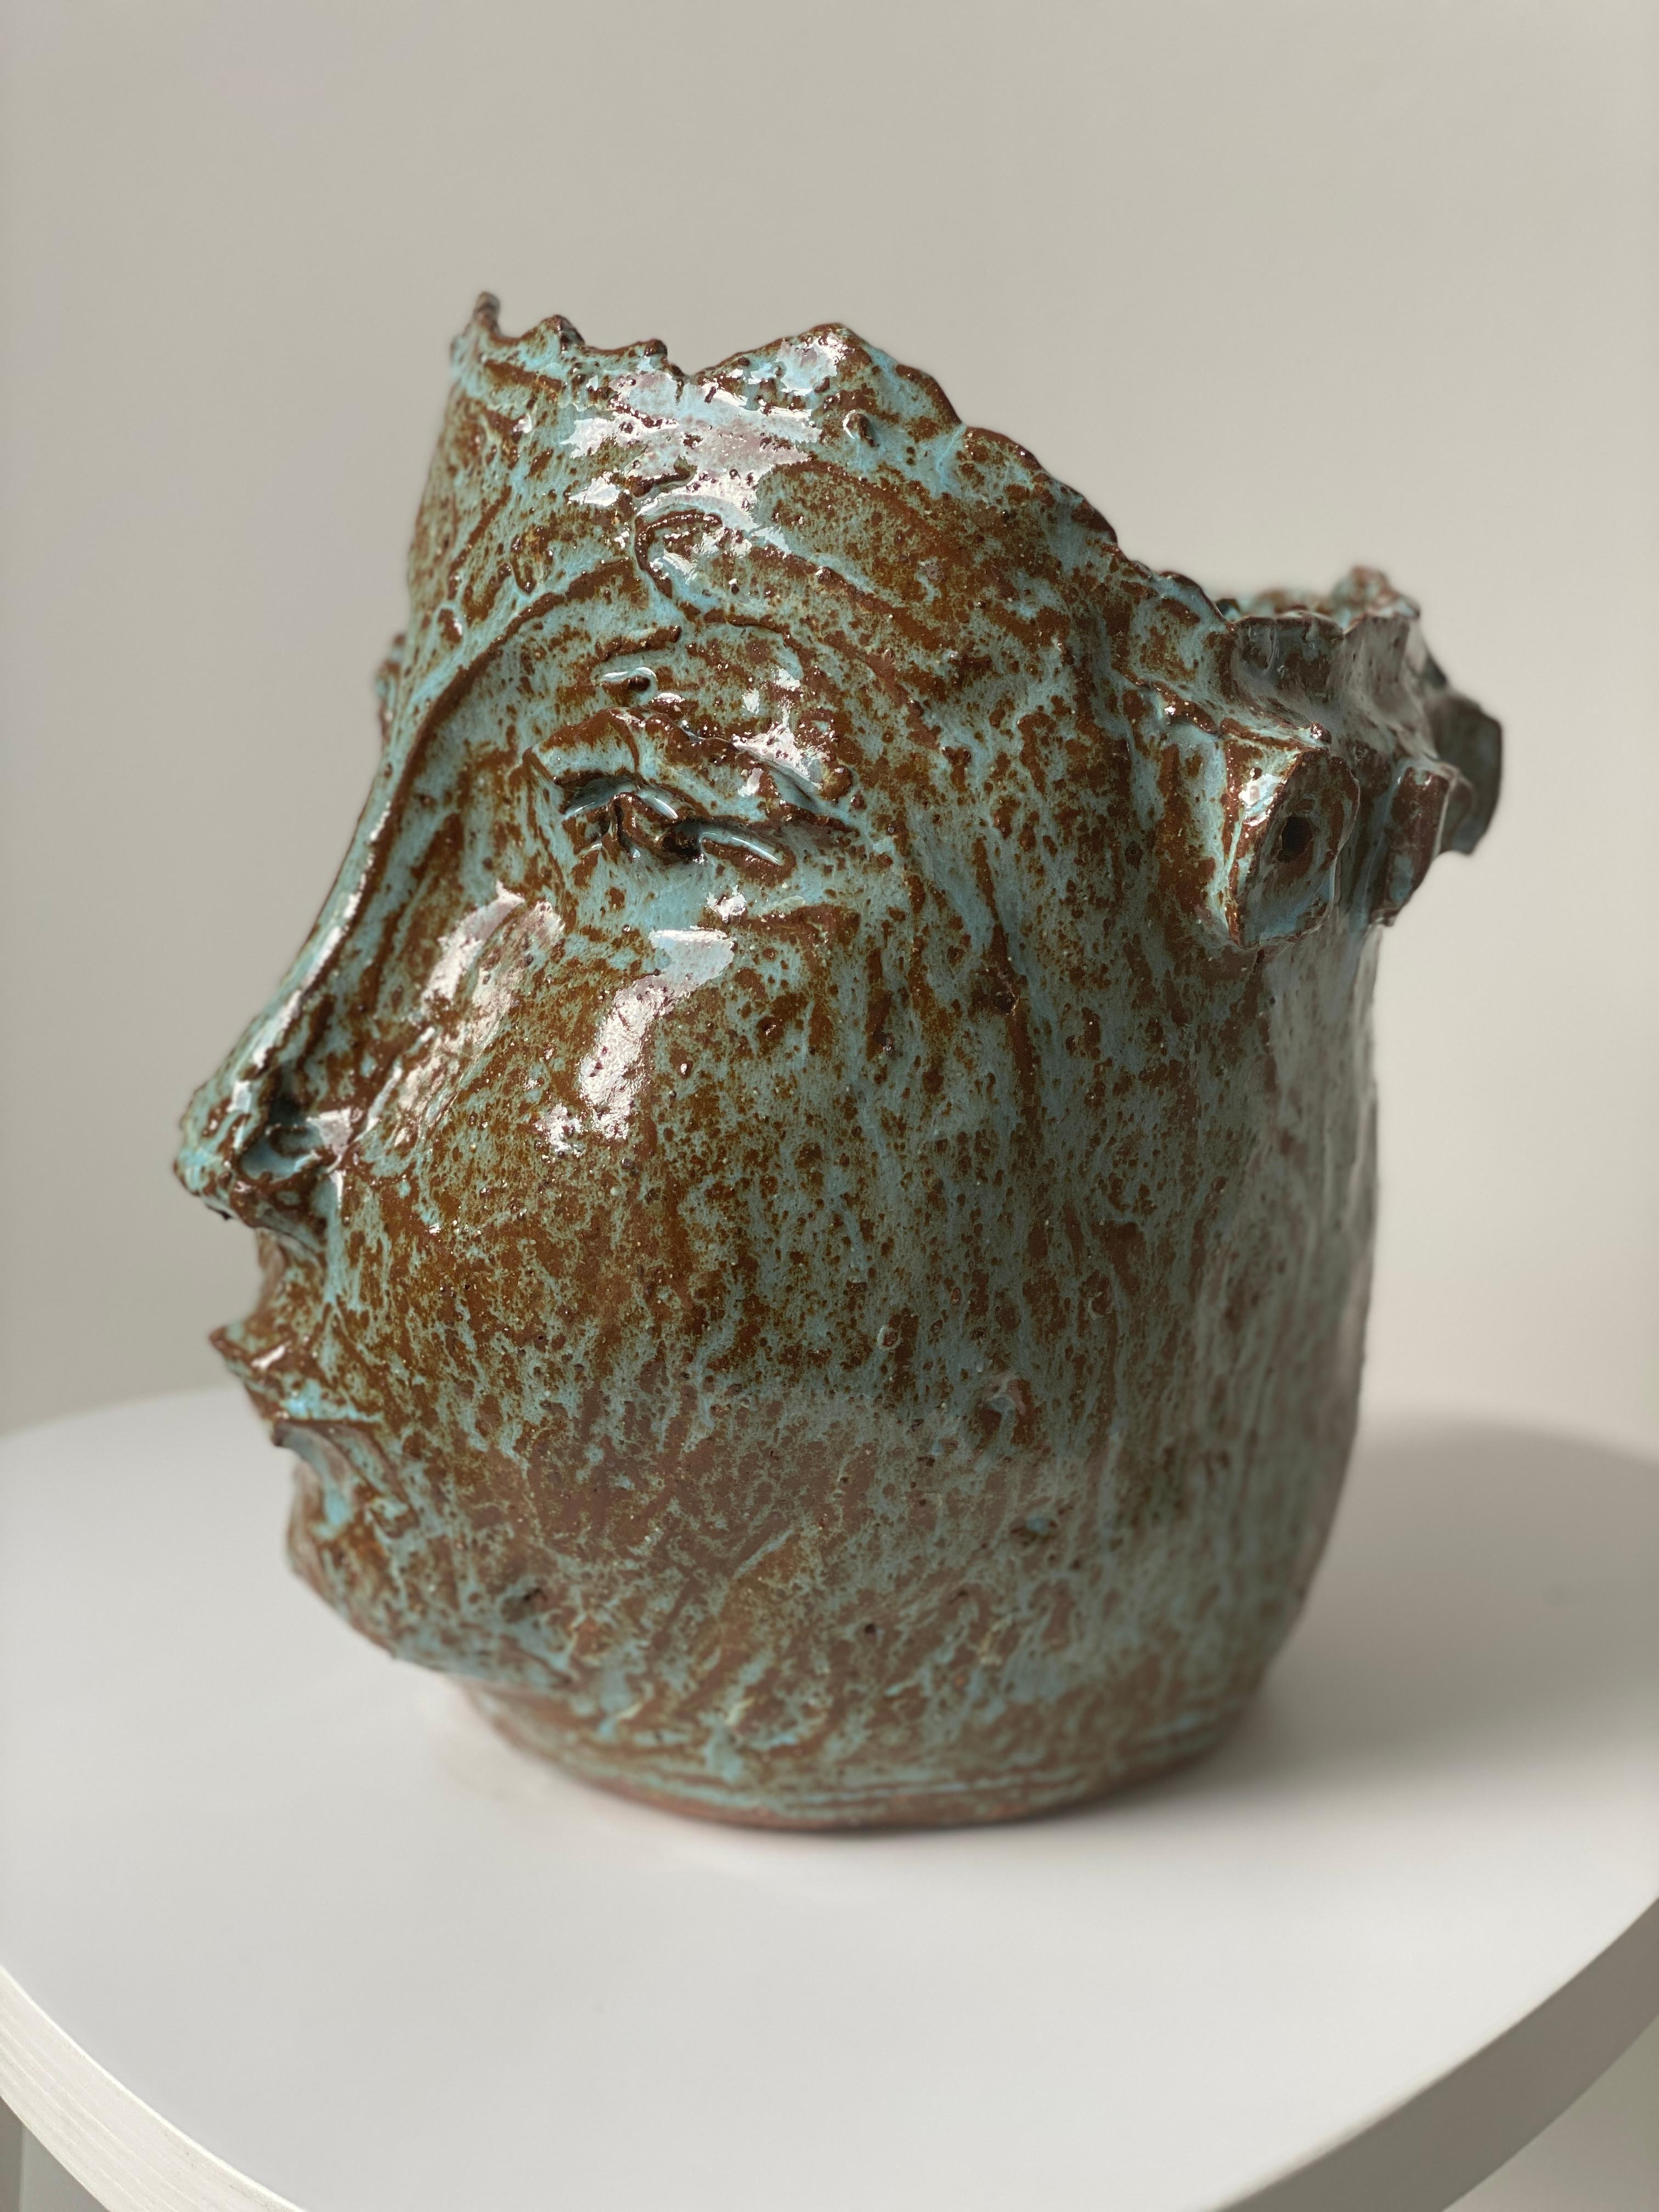 Elevate your space with this extraordinary exquisite clay sculptured face and head vase creation that promises to captivate and inspire.

This extraordinary, handcrafted vessel, radiates shinny aqua hues, earthy sienna and terracotta tones and